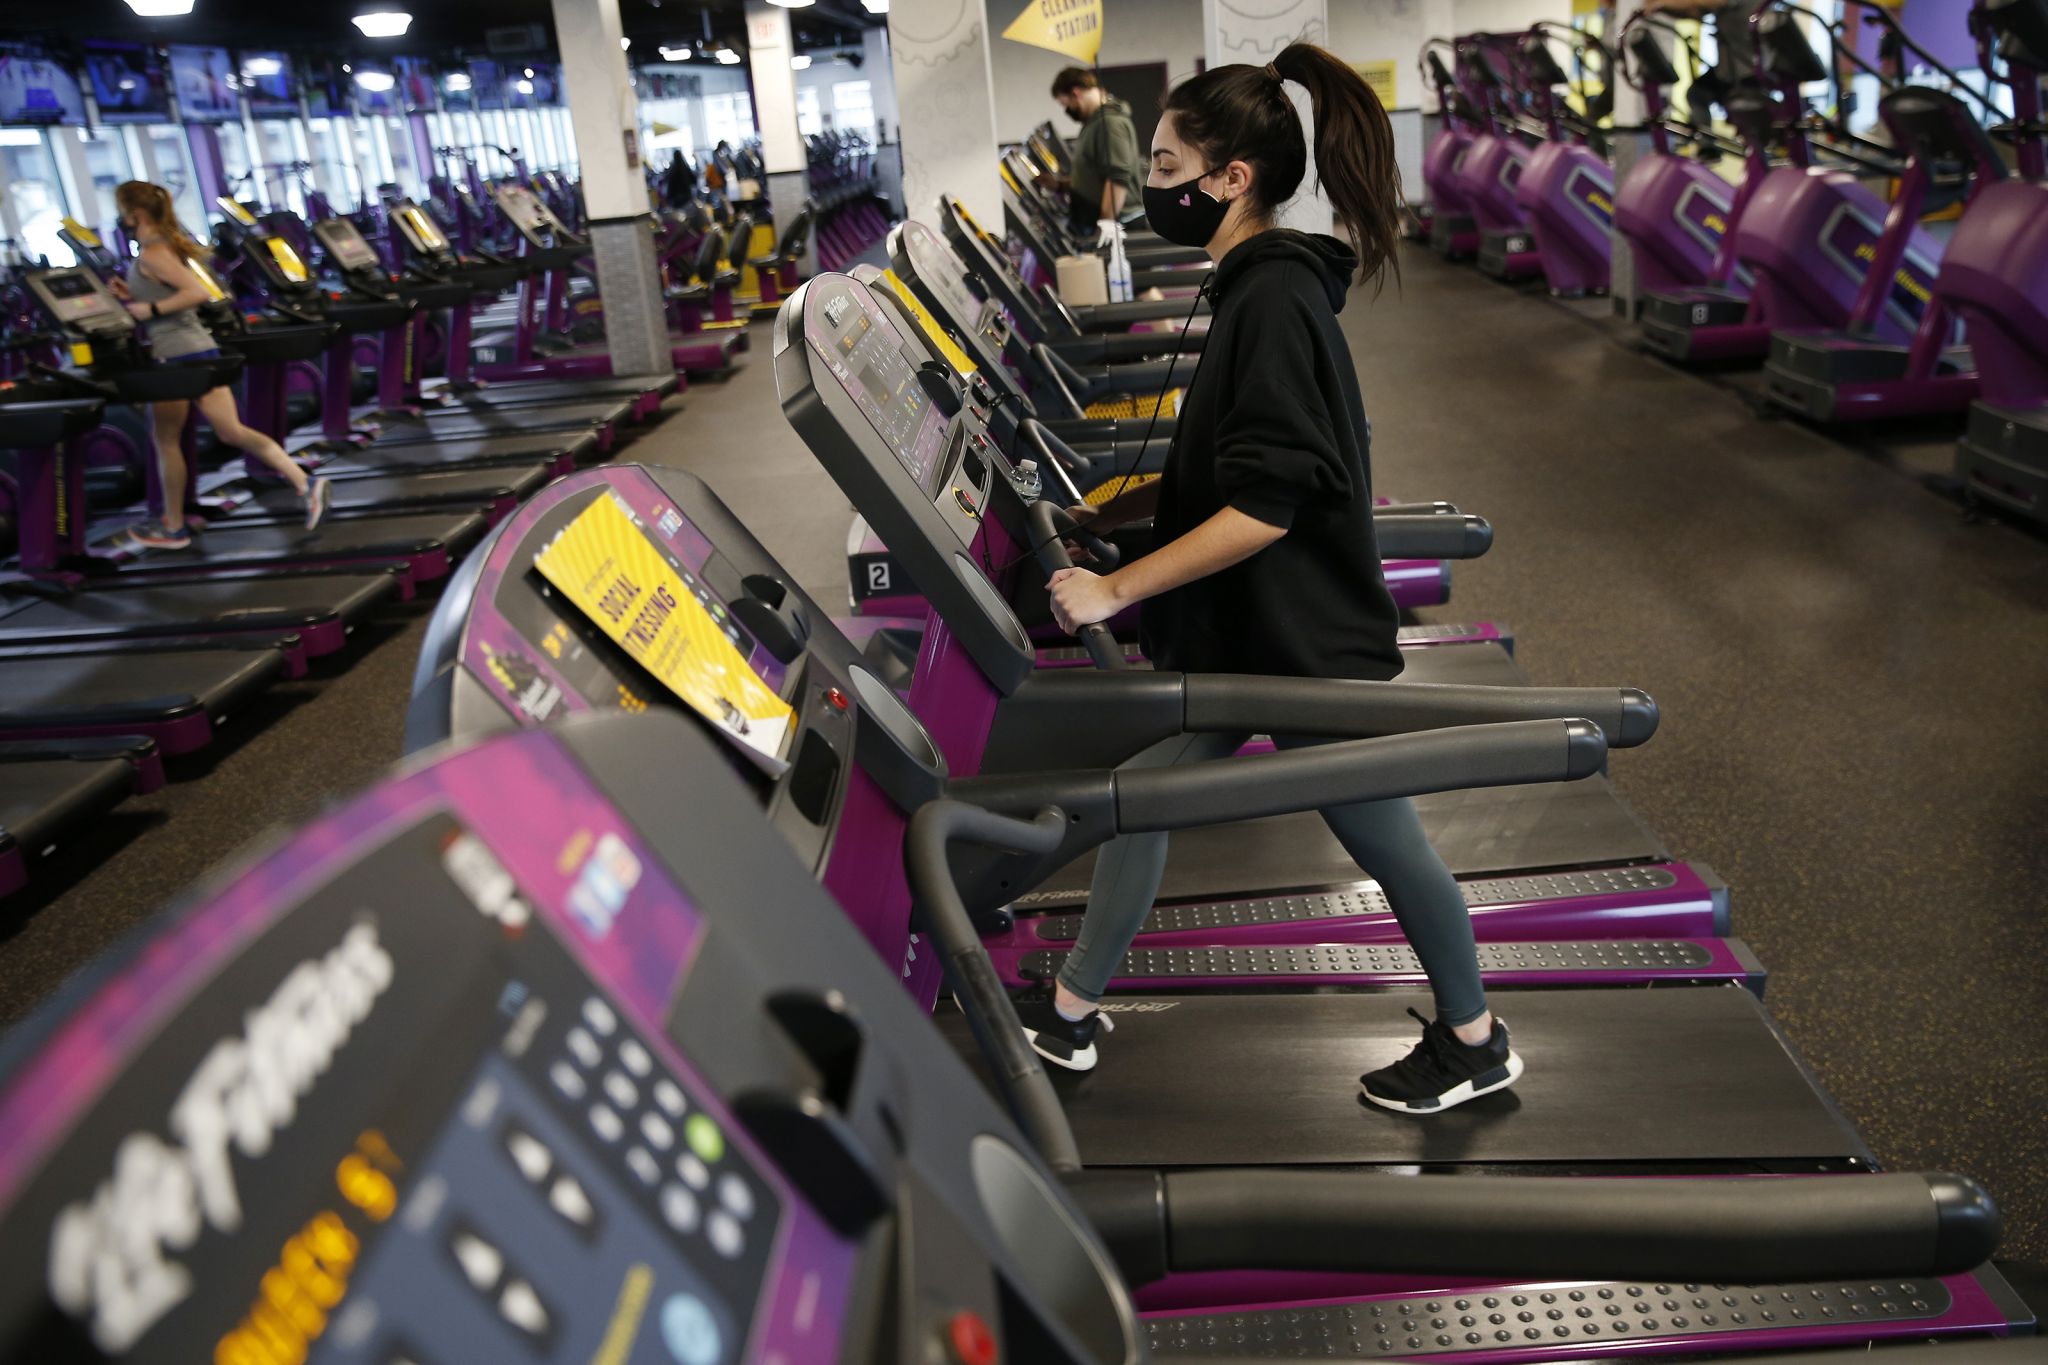 Simple 24 Hour Planet Fitness Stockton Ca for Gym